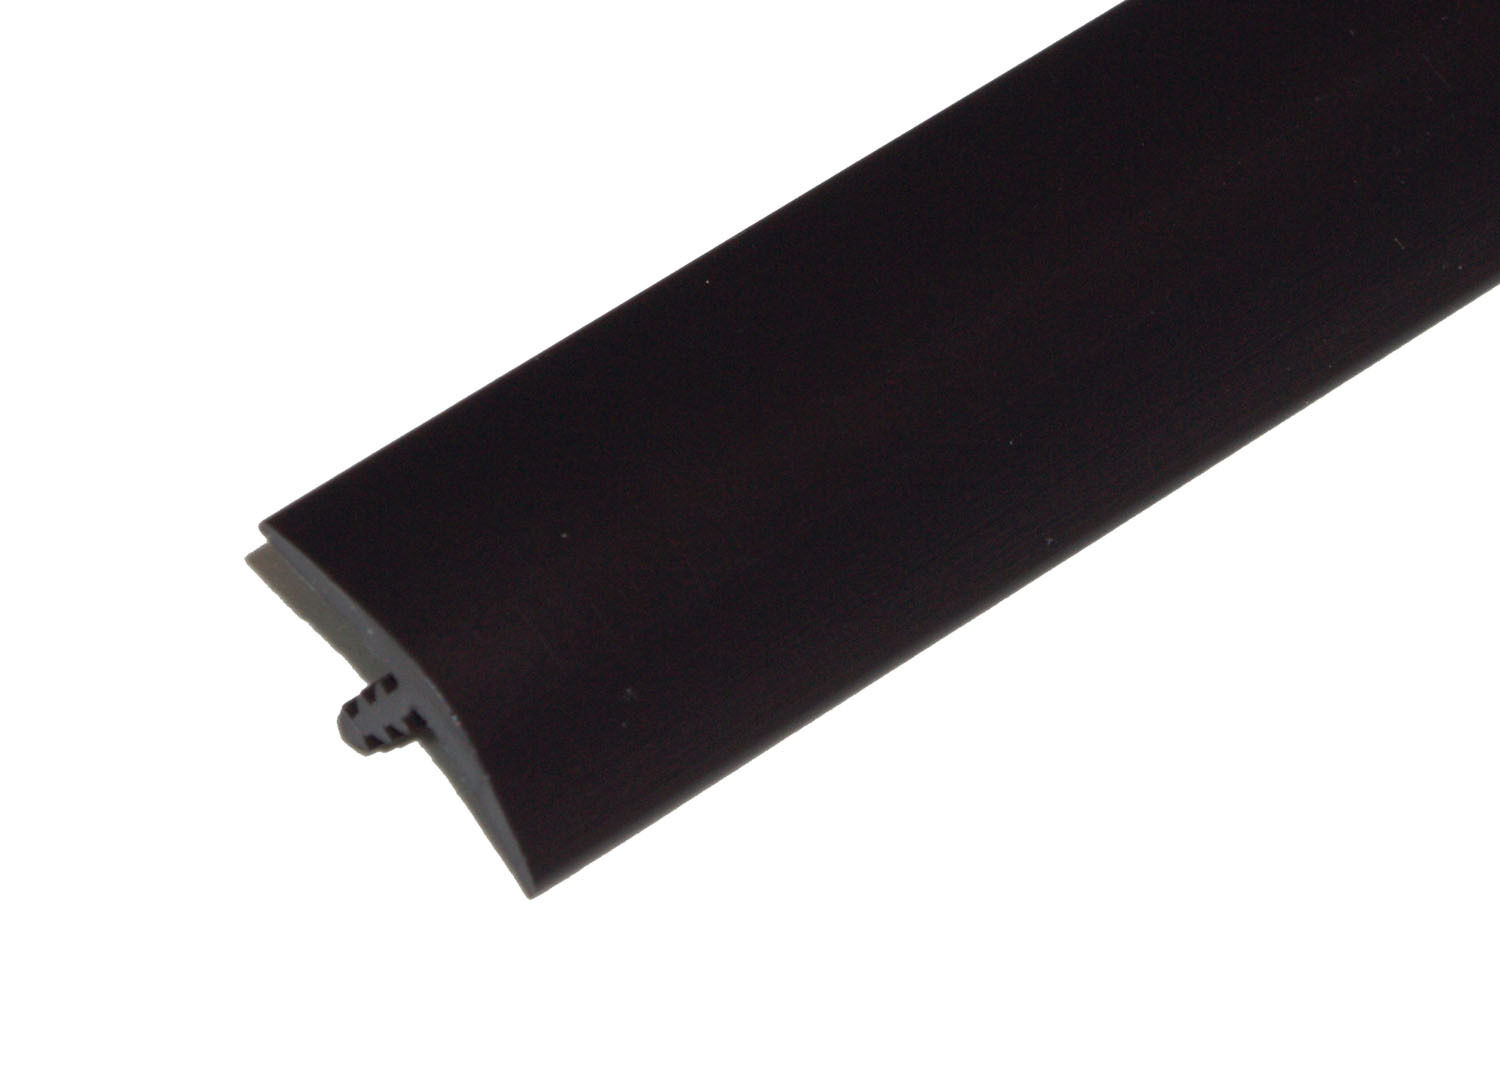 20ft Of 3/4" Black T-molding For Arcade Games, Mame Machine, Or Cabinets